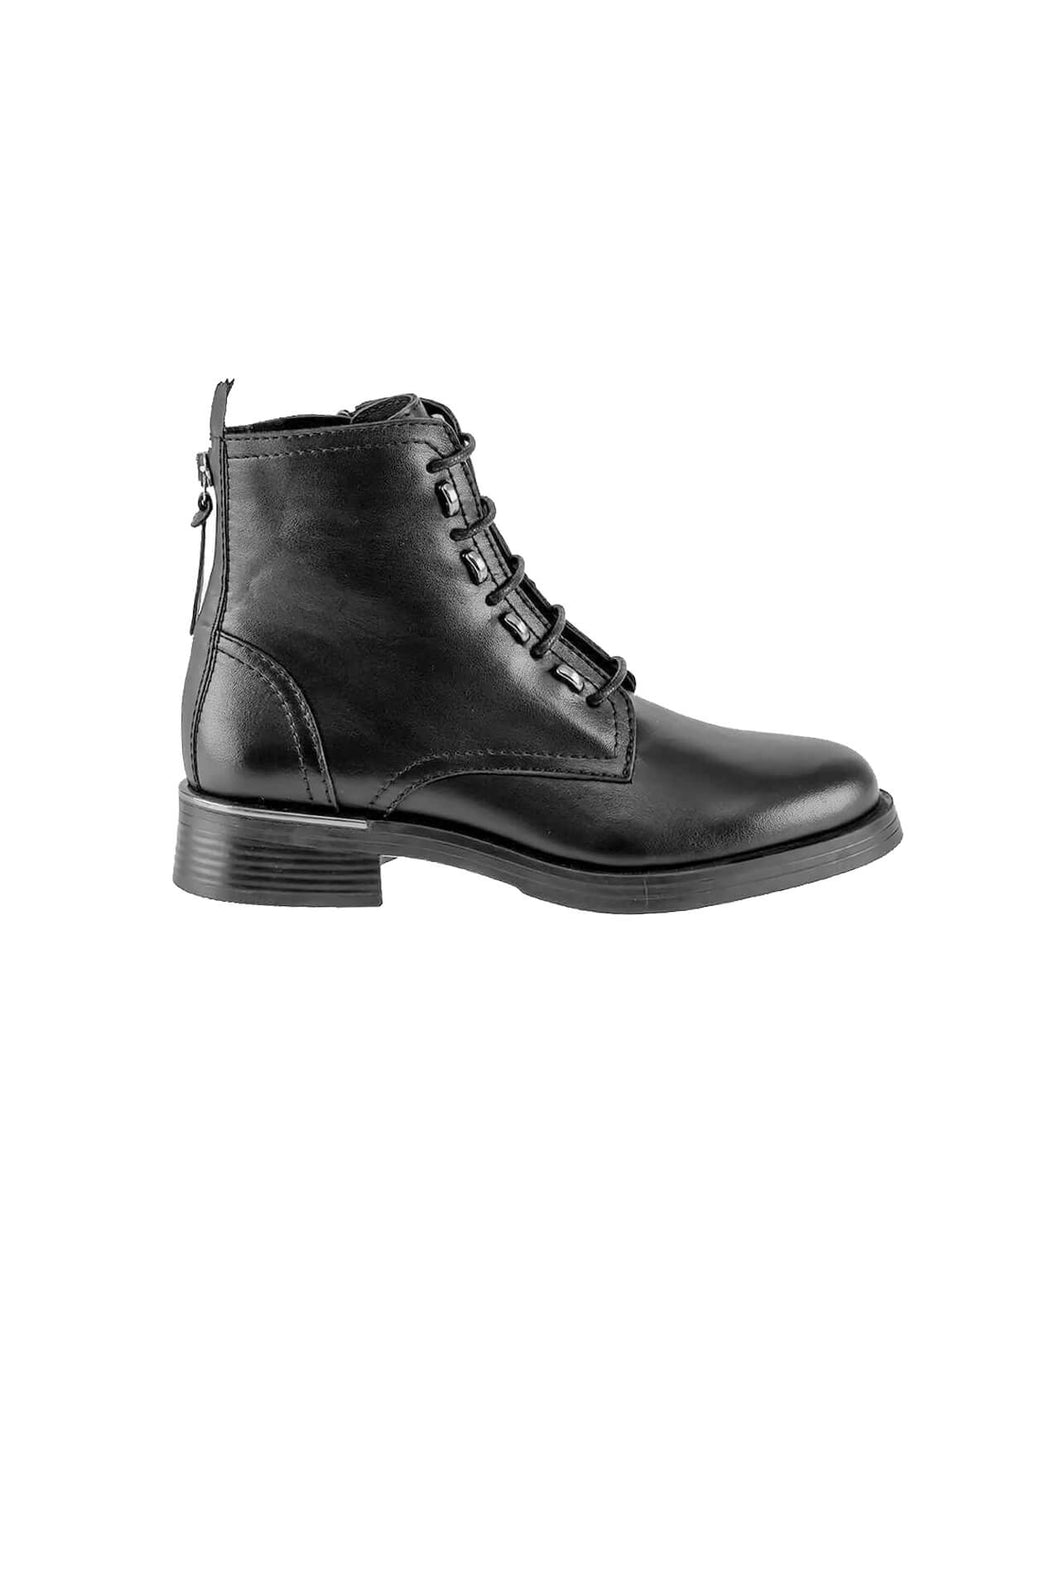 Black Lace Up B210 Boot